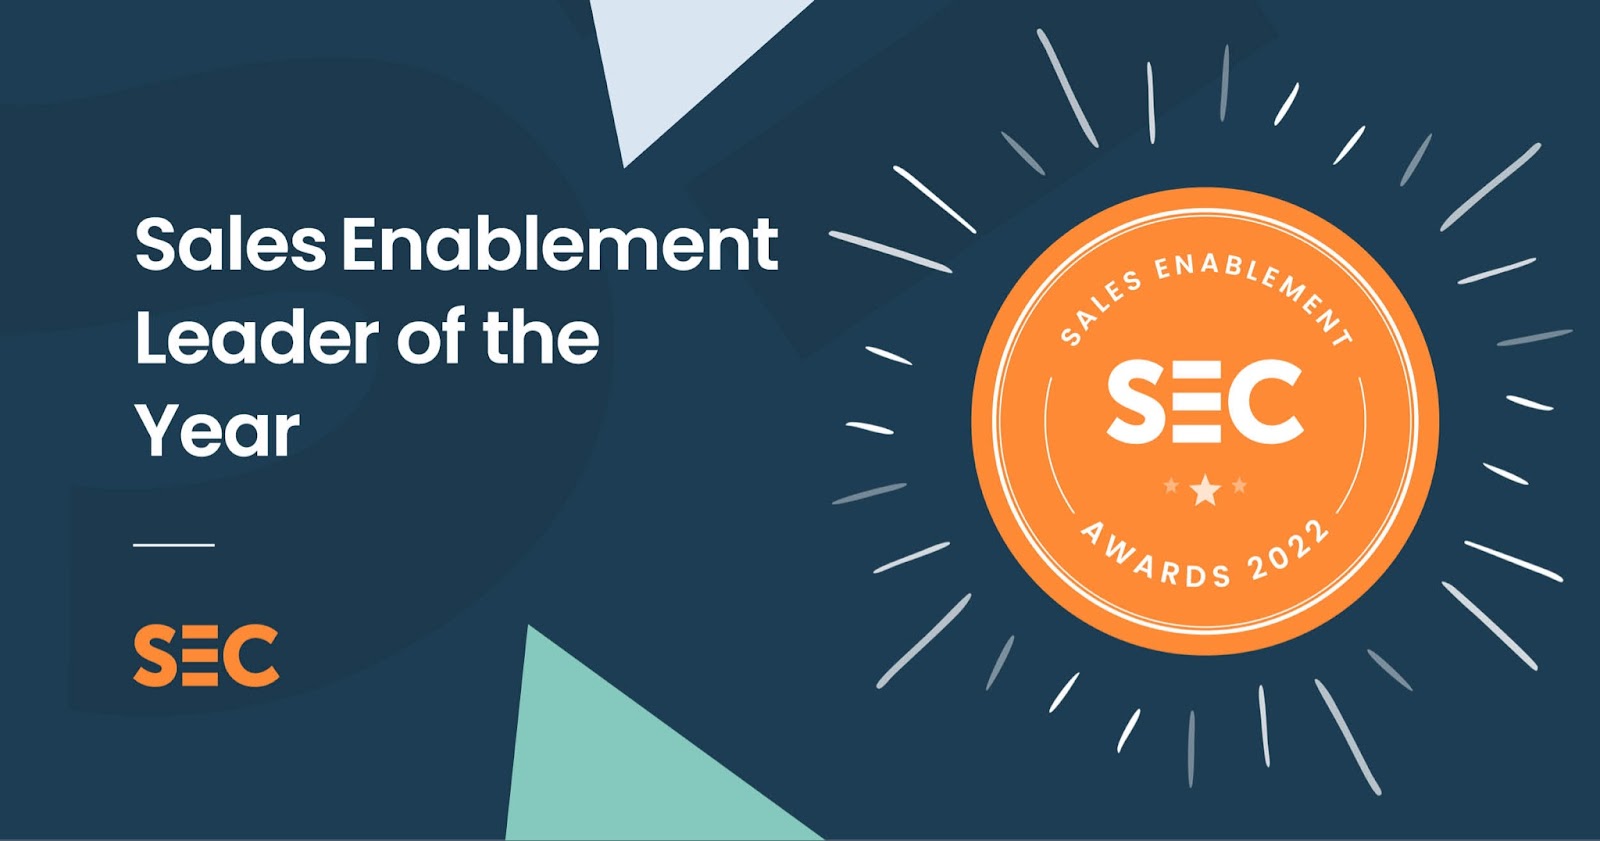 SEC Sales Enablement Leader of the Year graphic